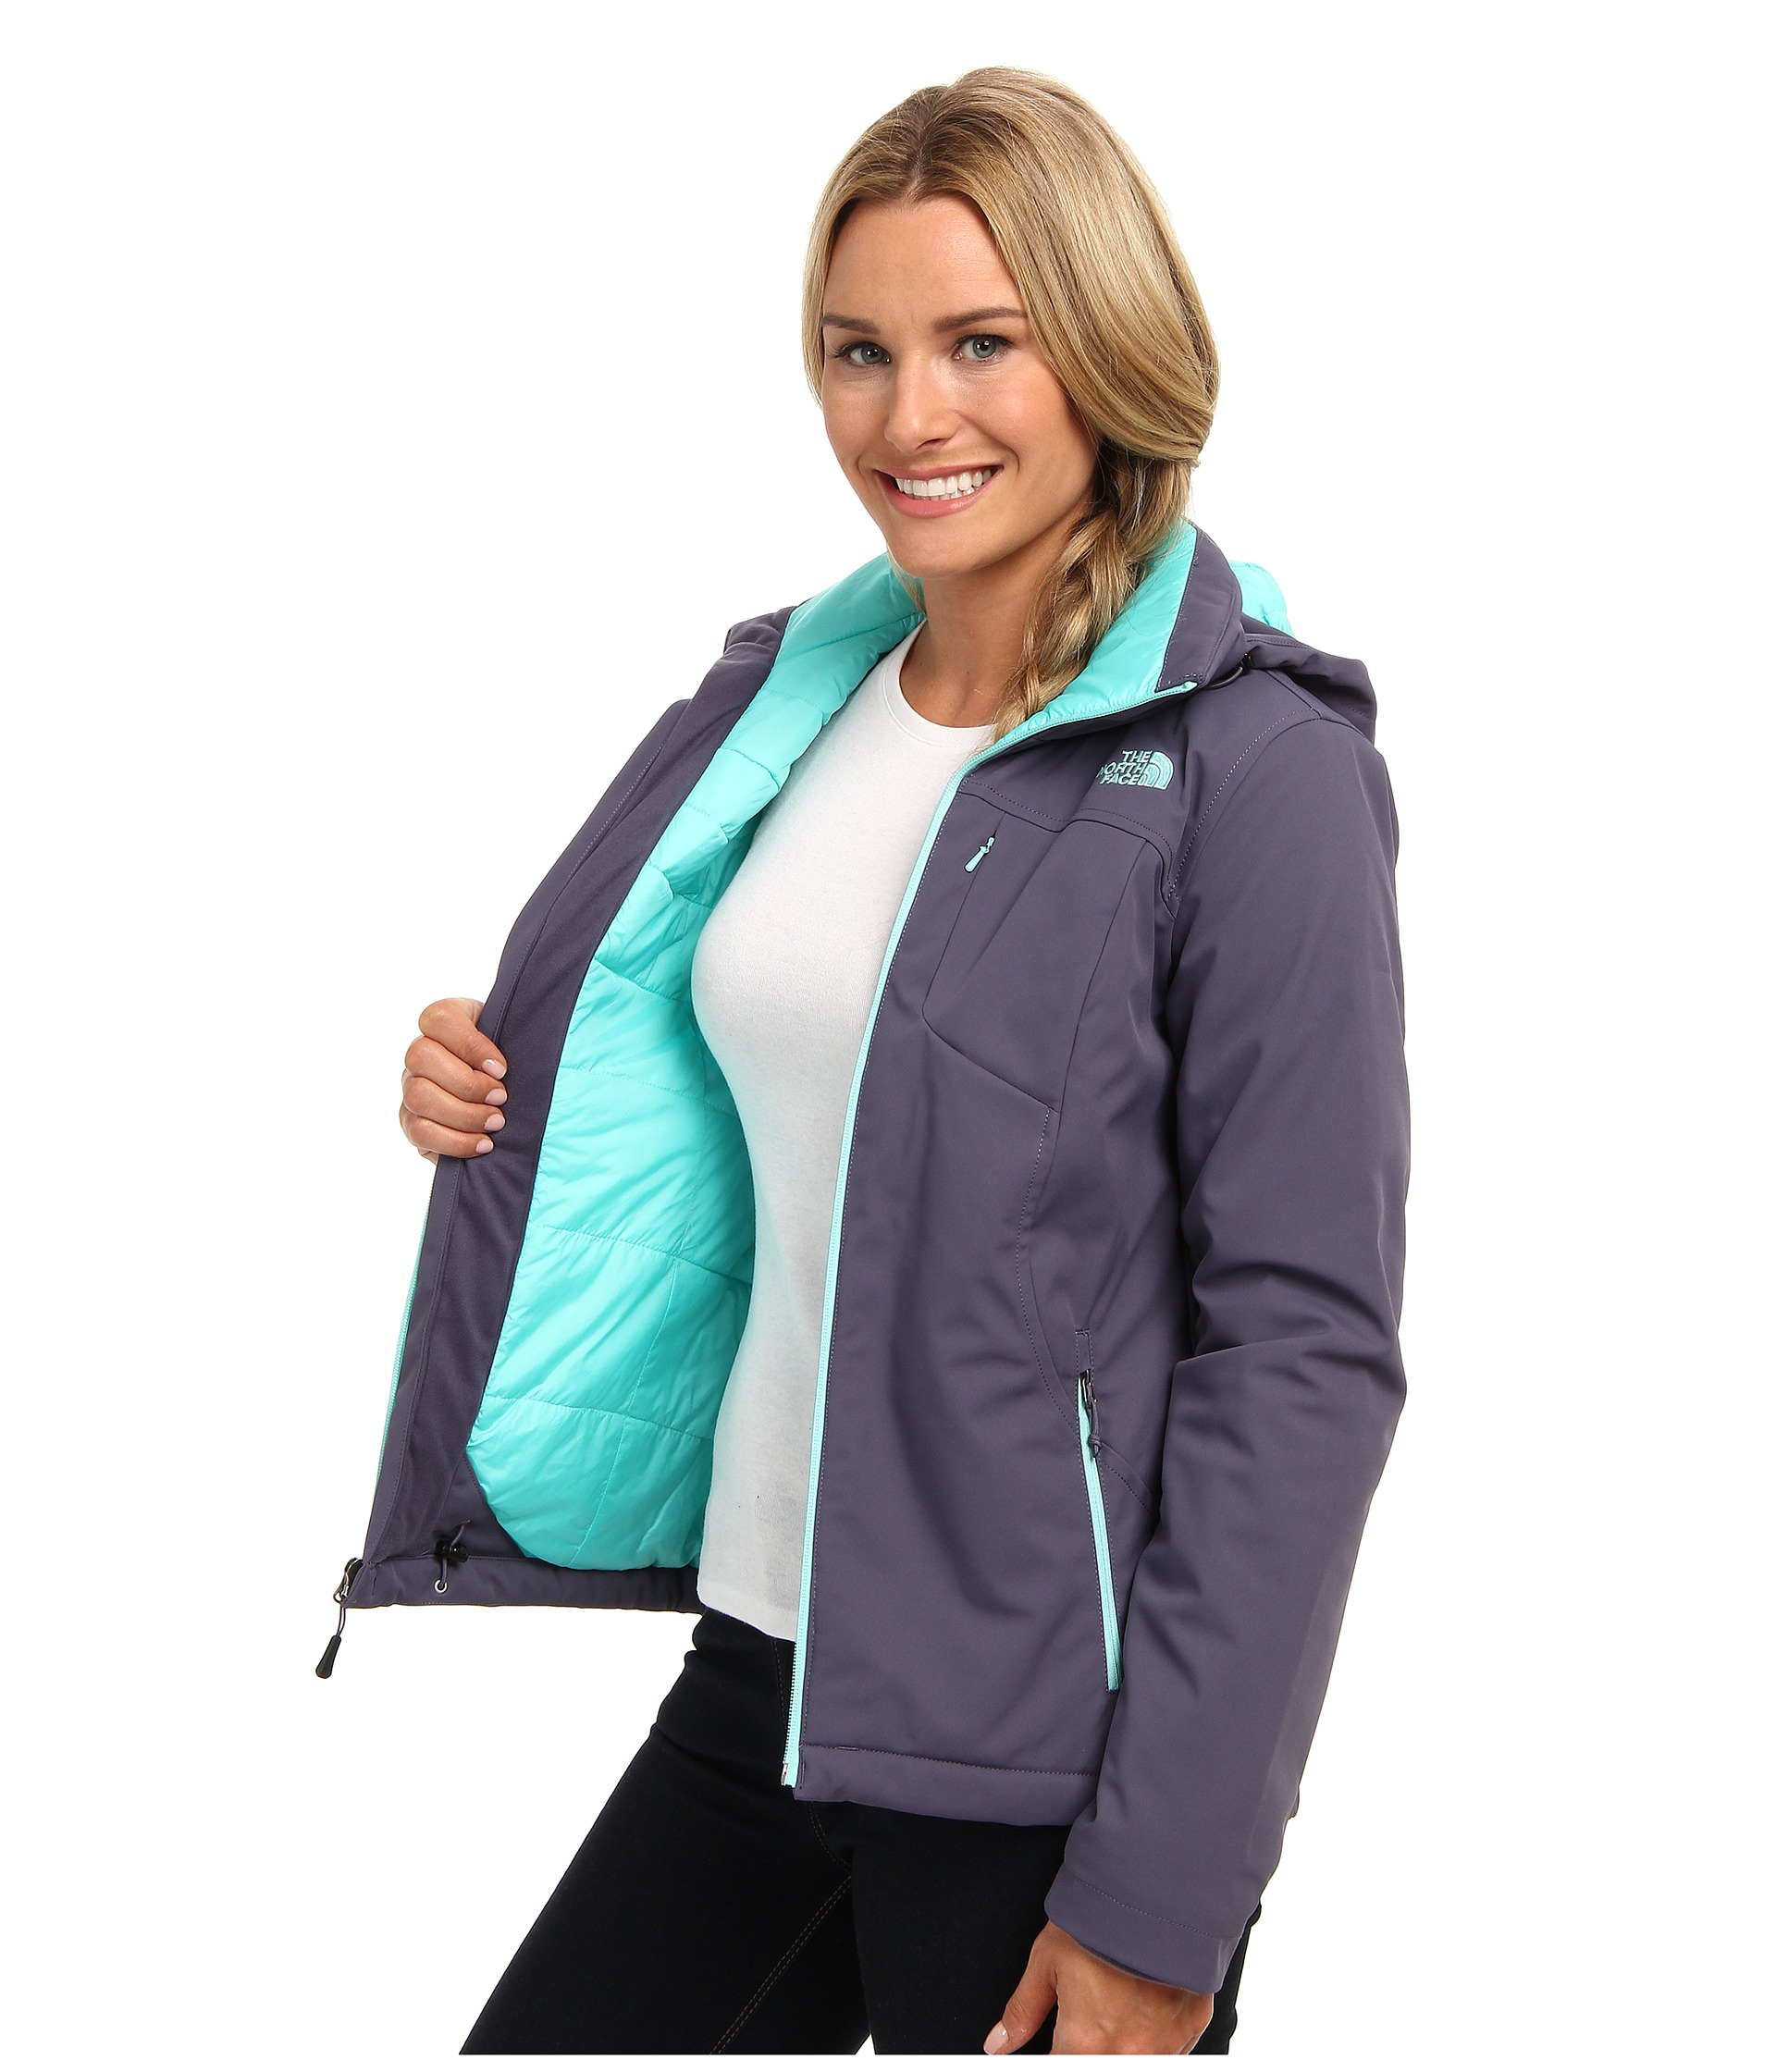 the north face apex elevation jacket womens